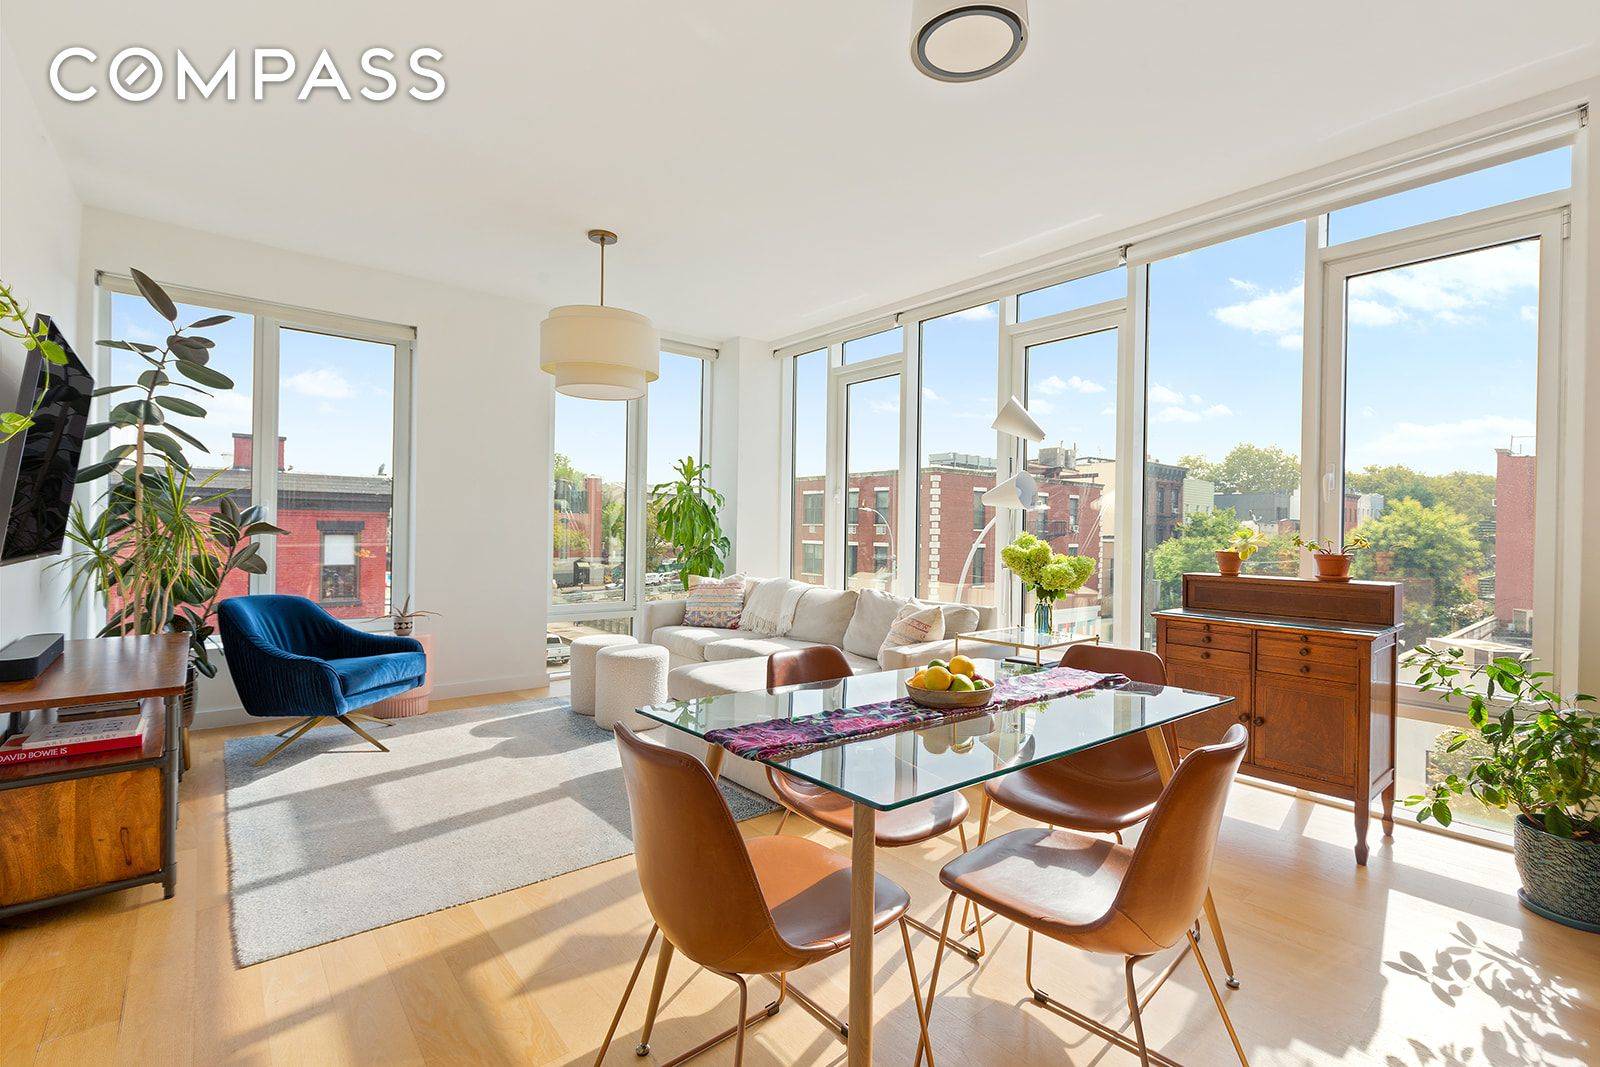 Welcome home to the two bed, two bath condo you have been waiting for in the South Slope.